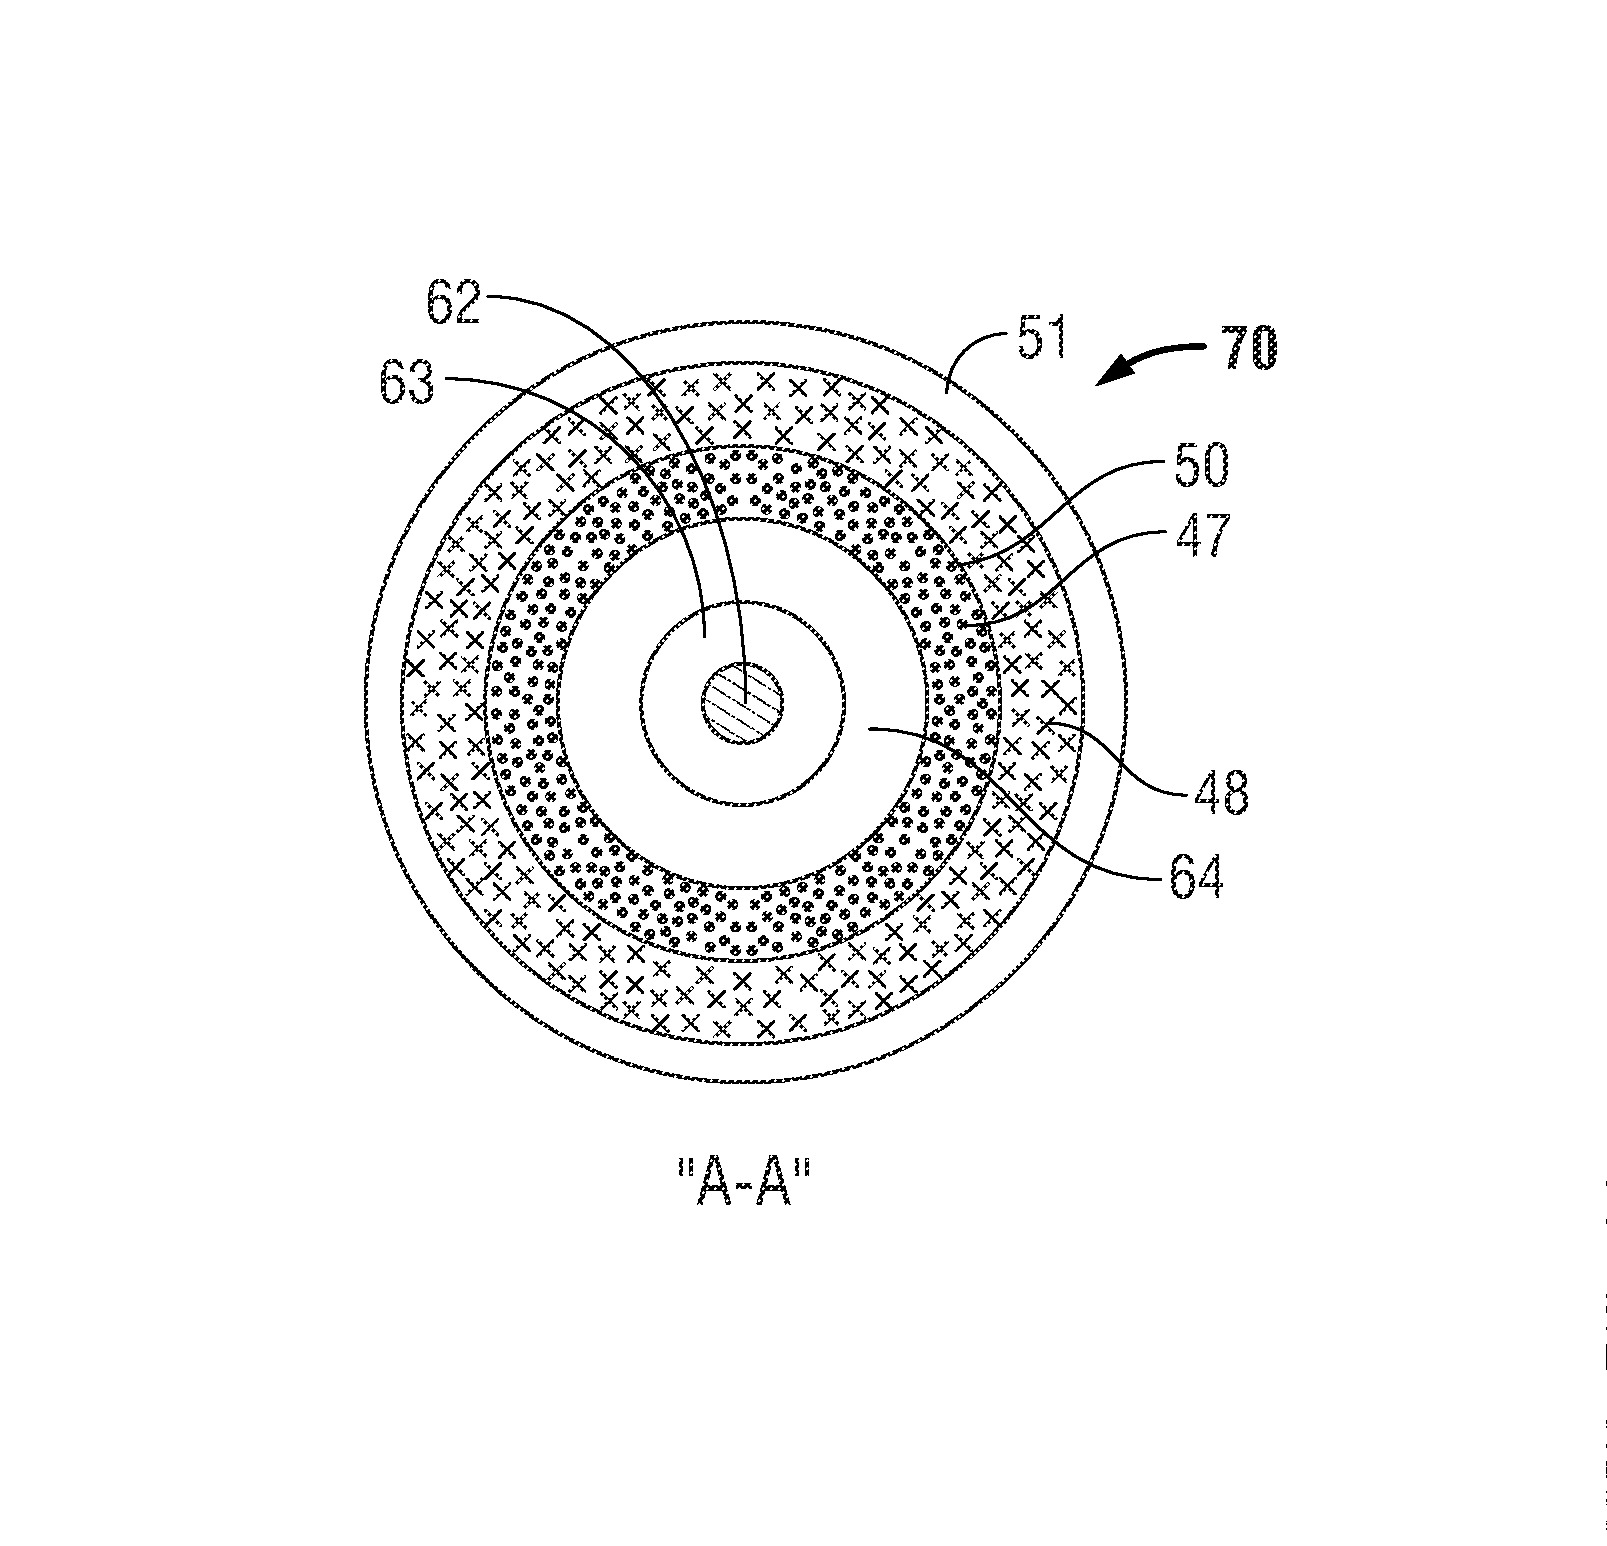 Microwave ablation instrument with interchangeable antenna probe